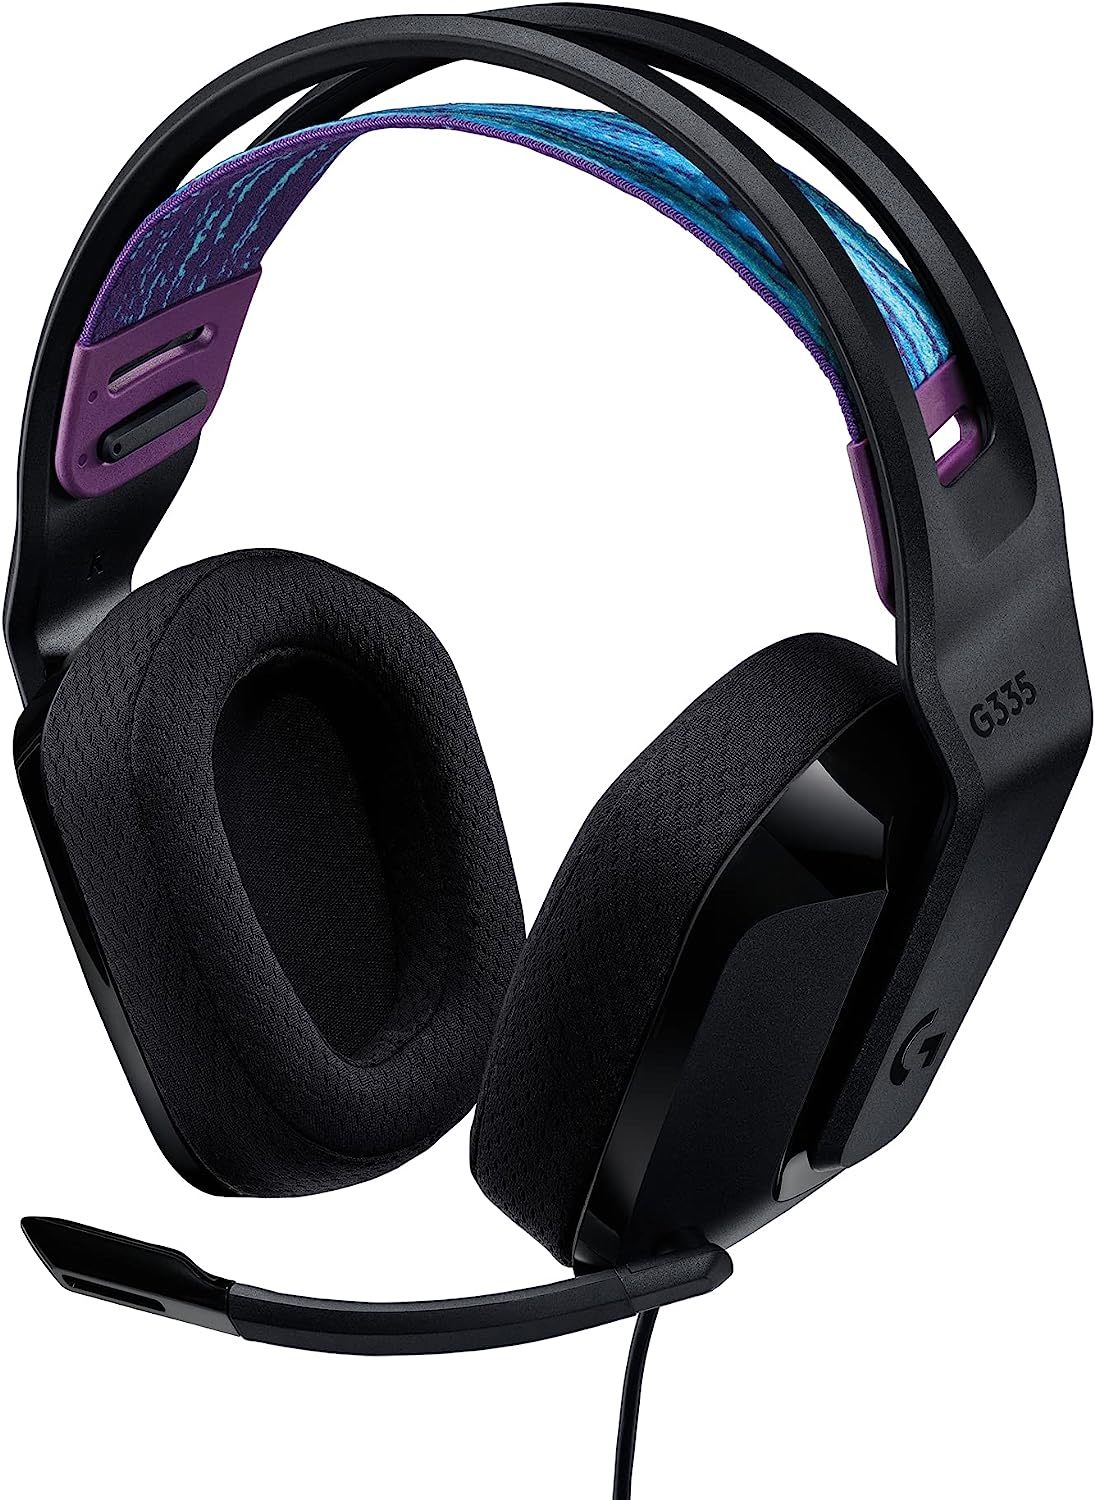 The Black Logitech G335 Wired Gaming Headset Features A Flip-To-Mute Microphone, - $64.98